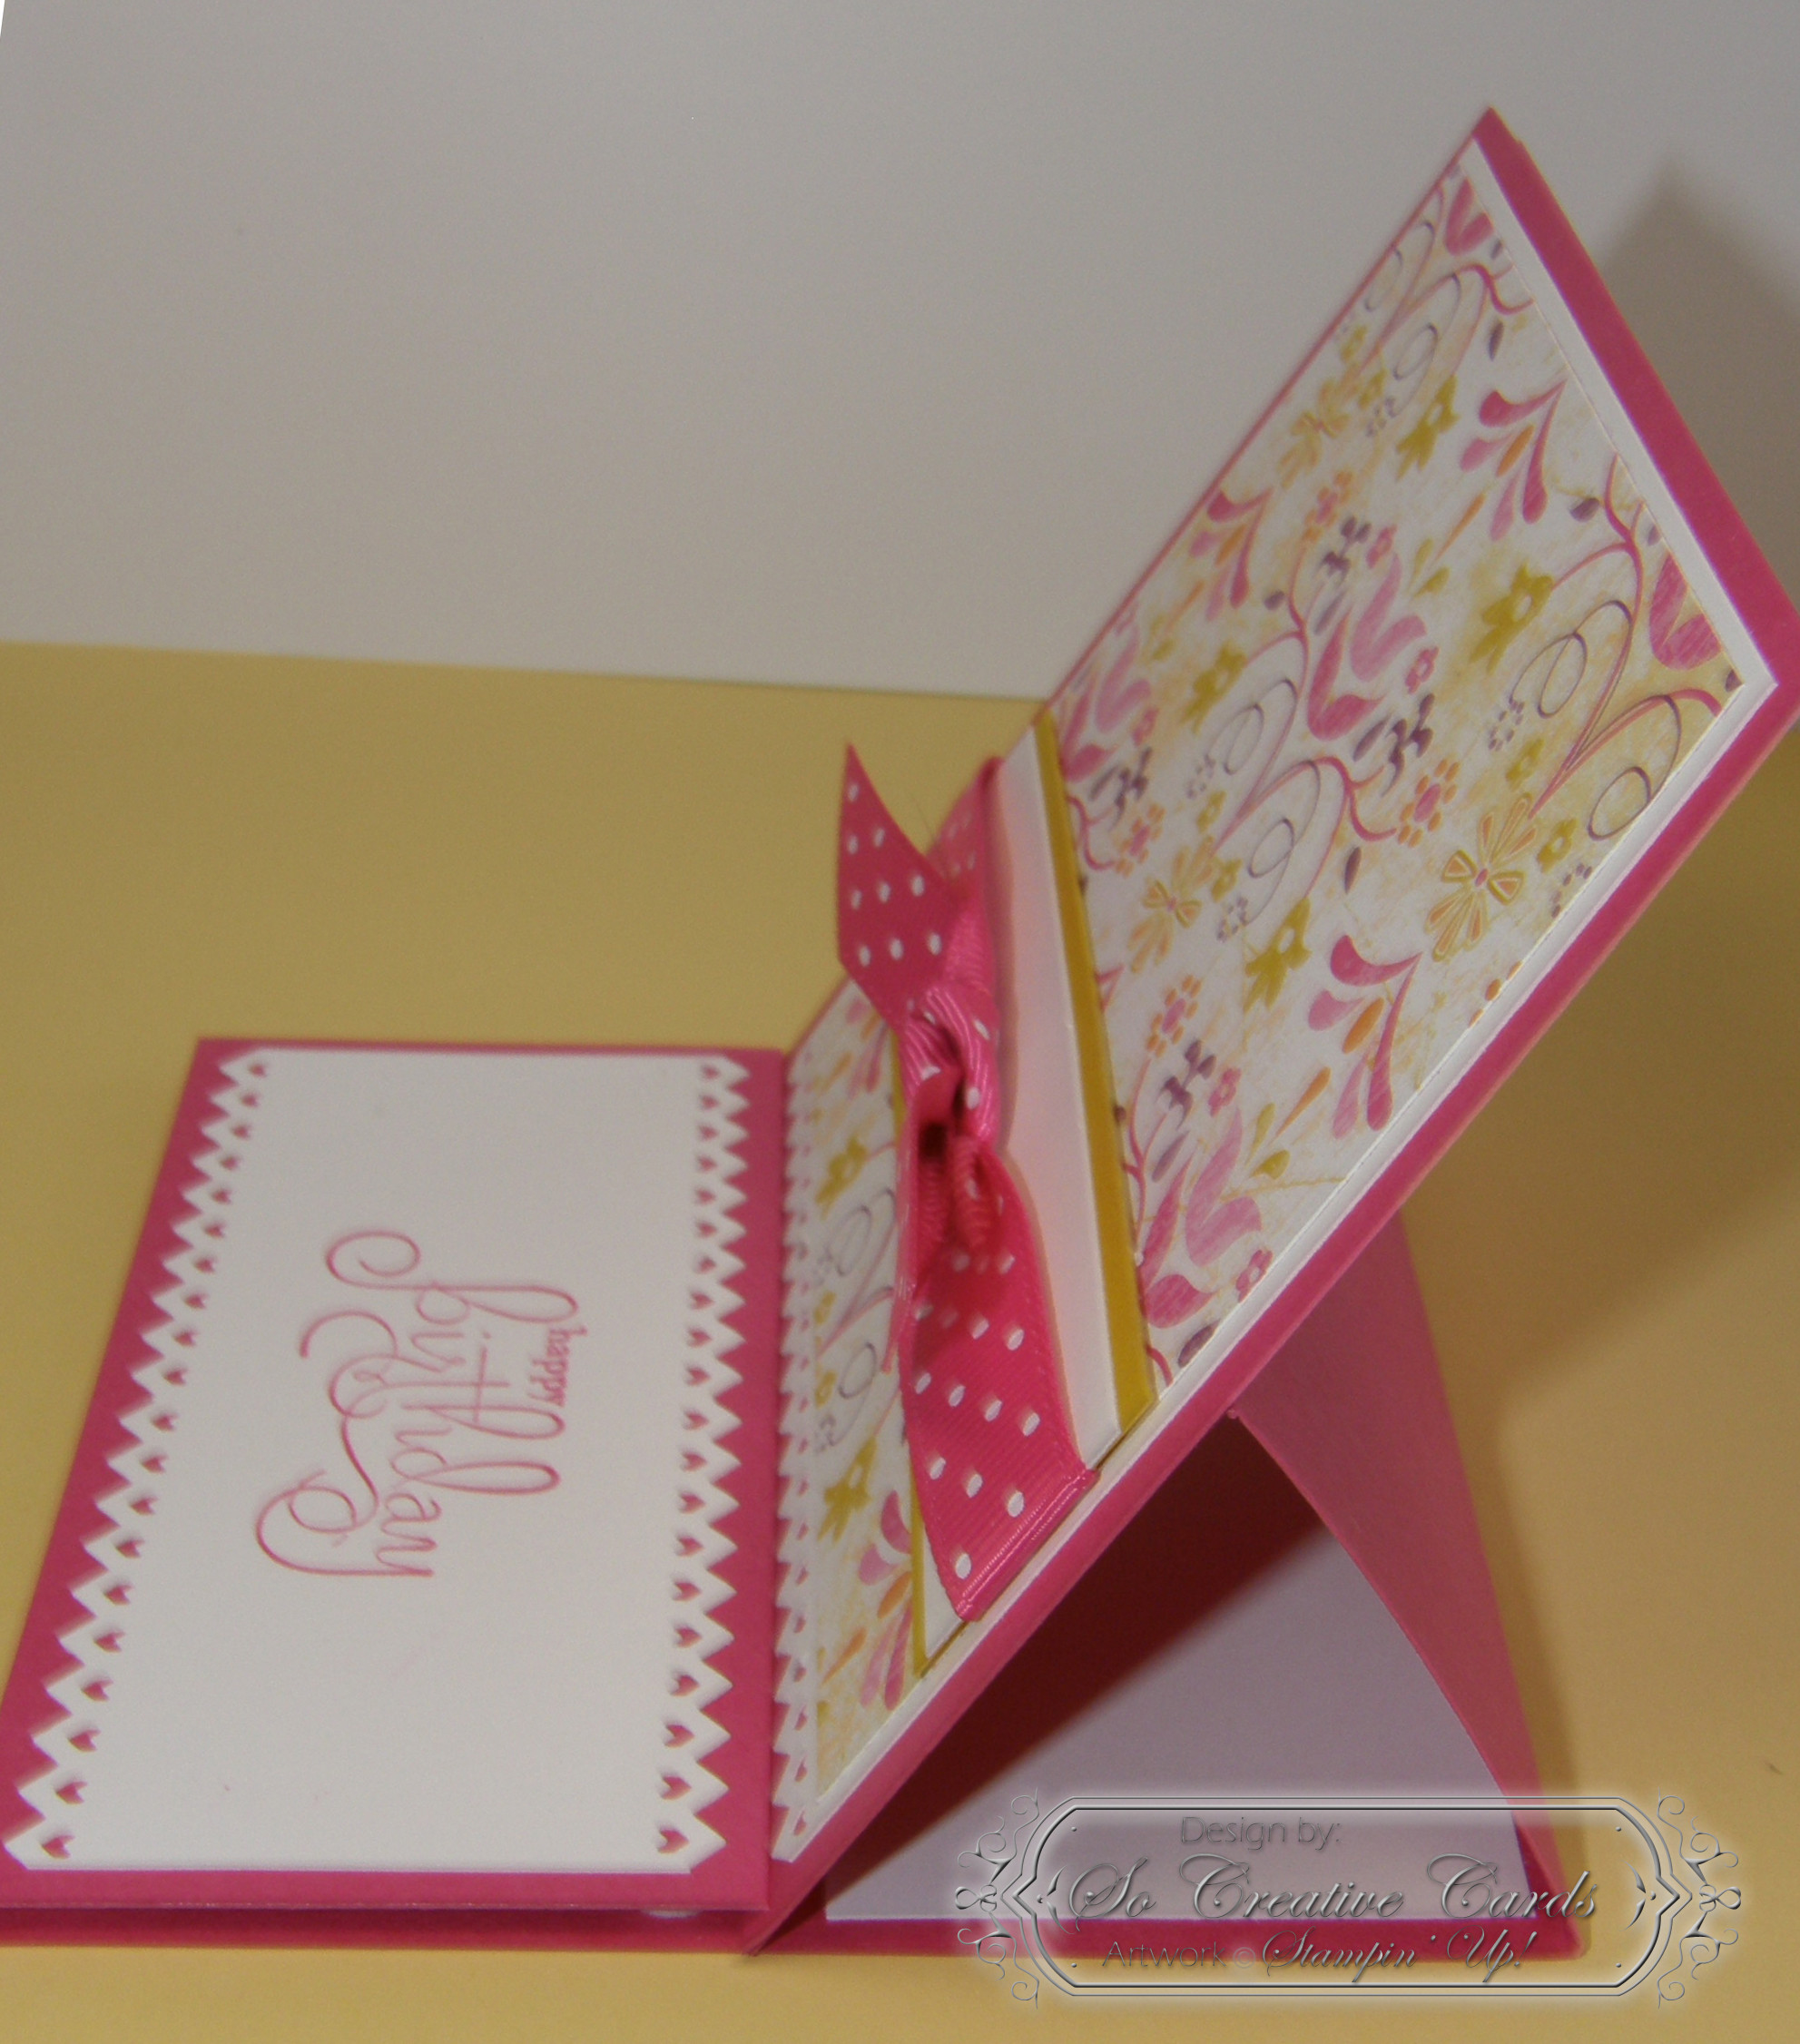 Creative Birthday Cards
 Stampin Up So Creative Cards